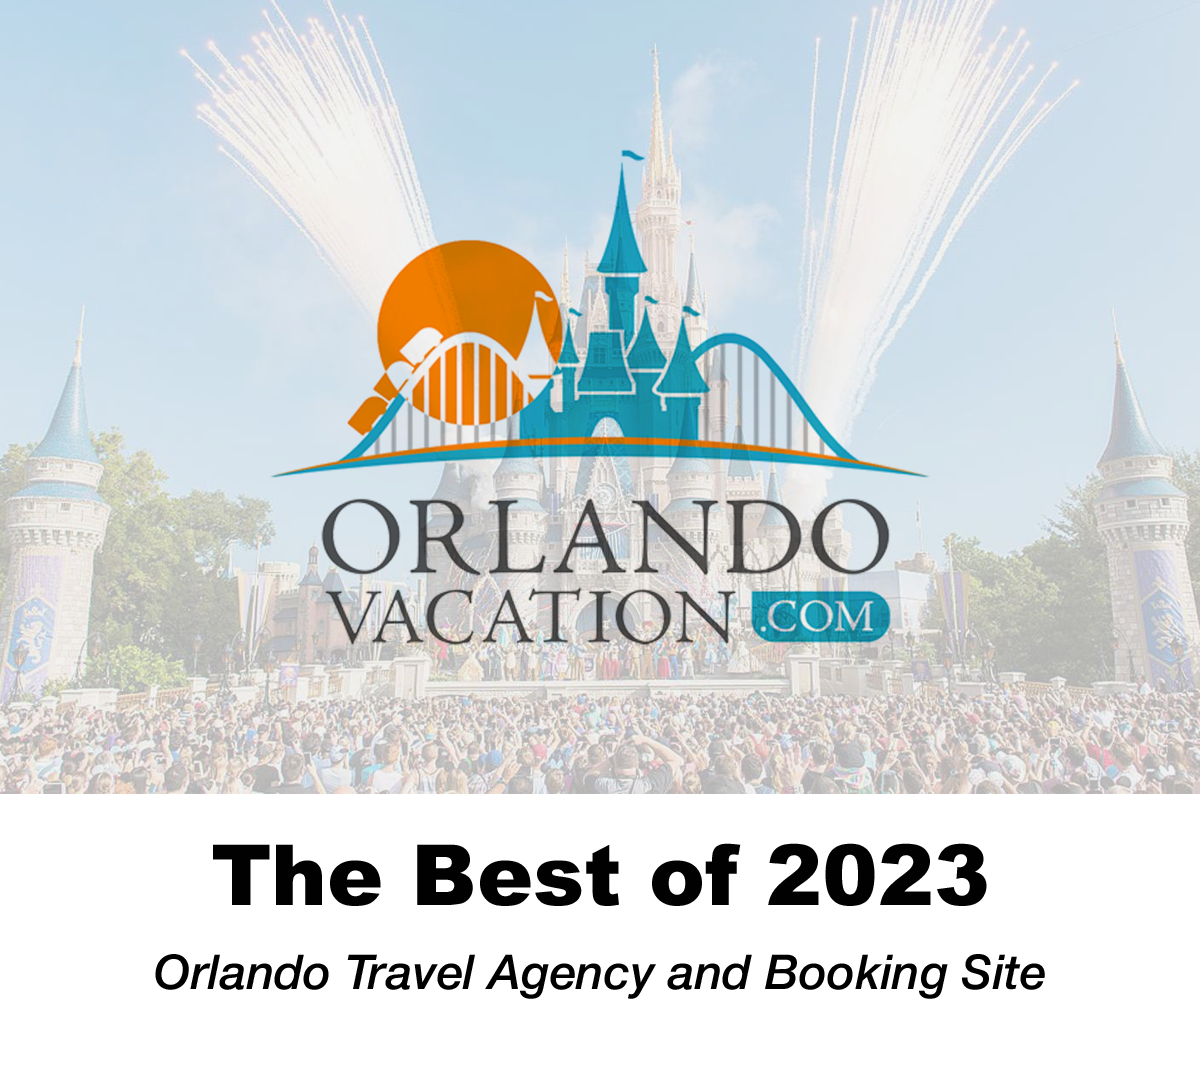 Orlando Vacation | The Best Vacation Deals and Packages!